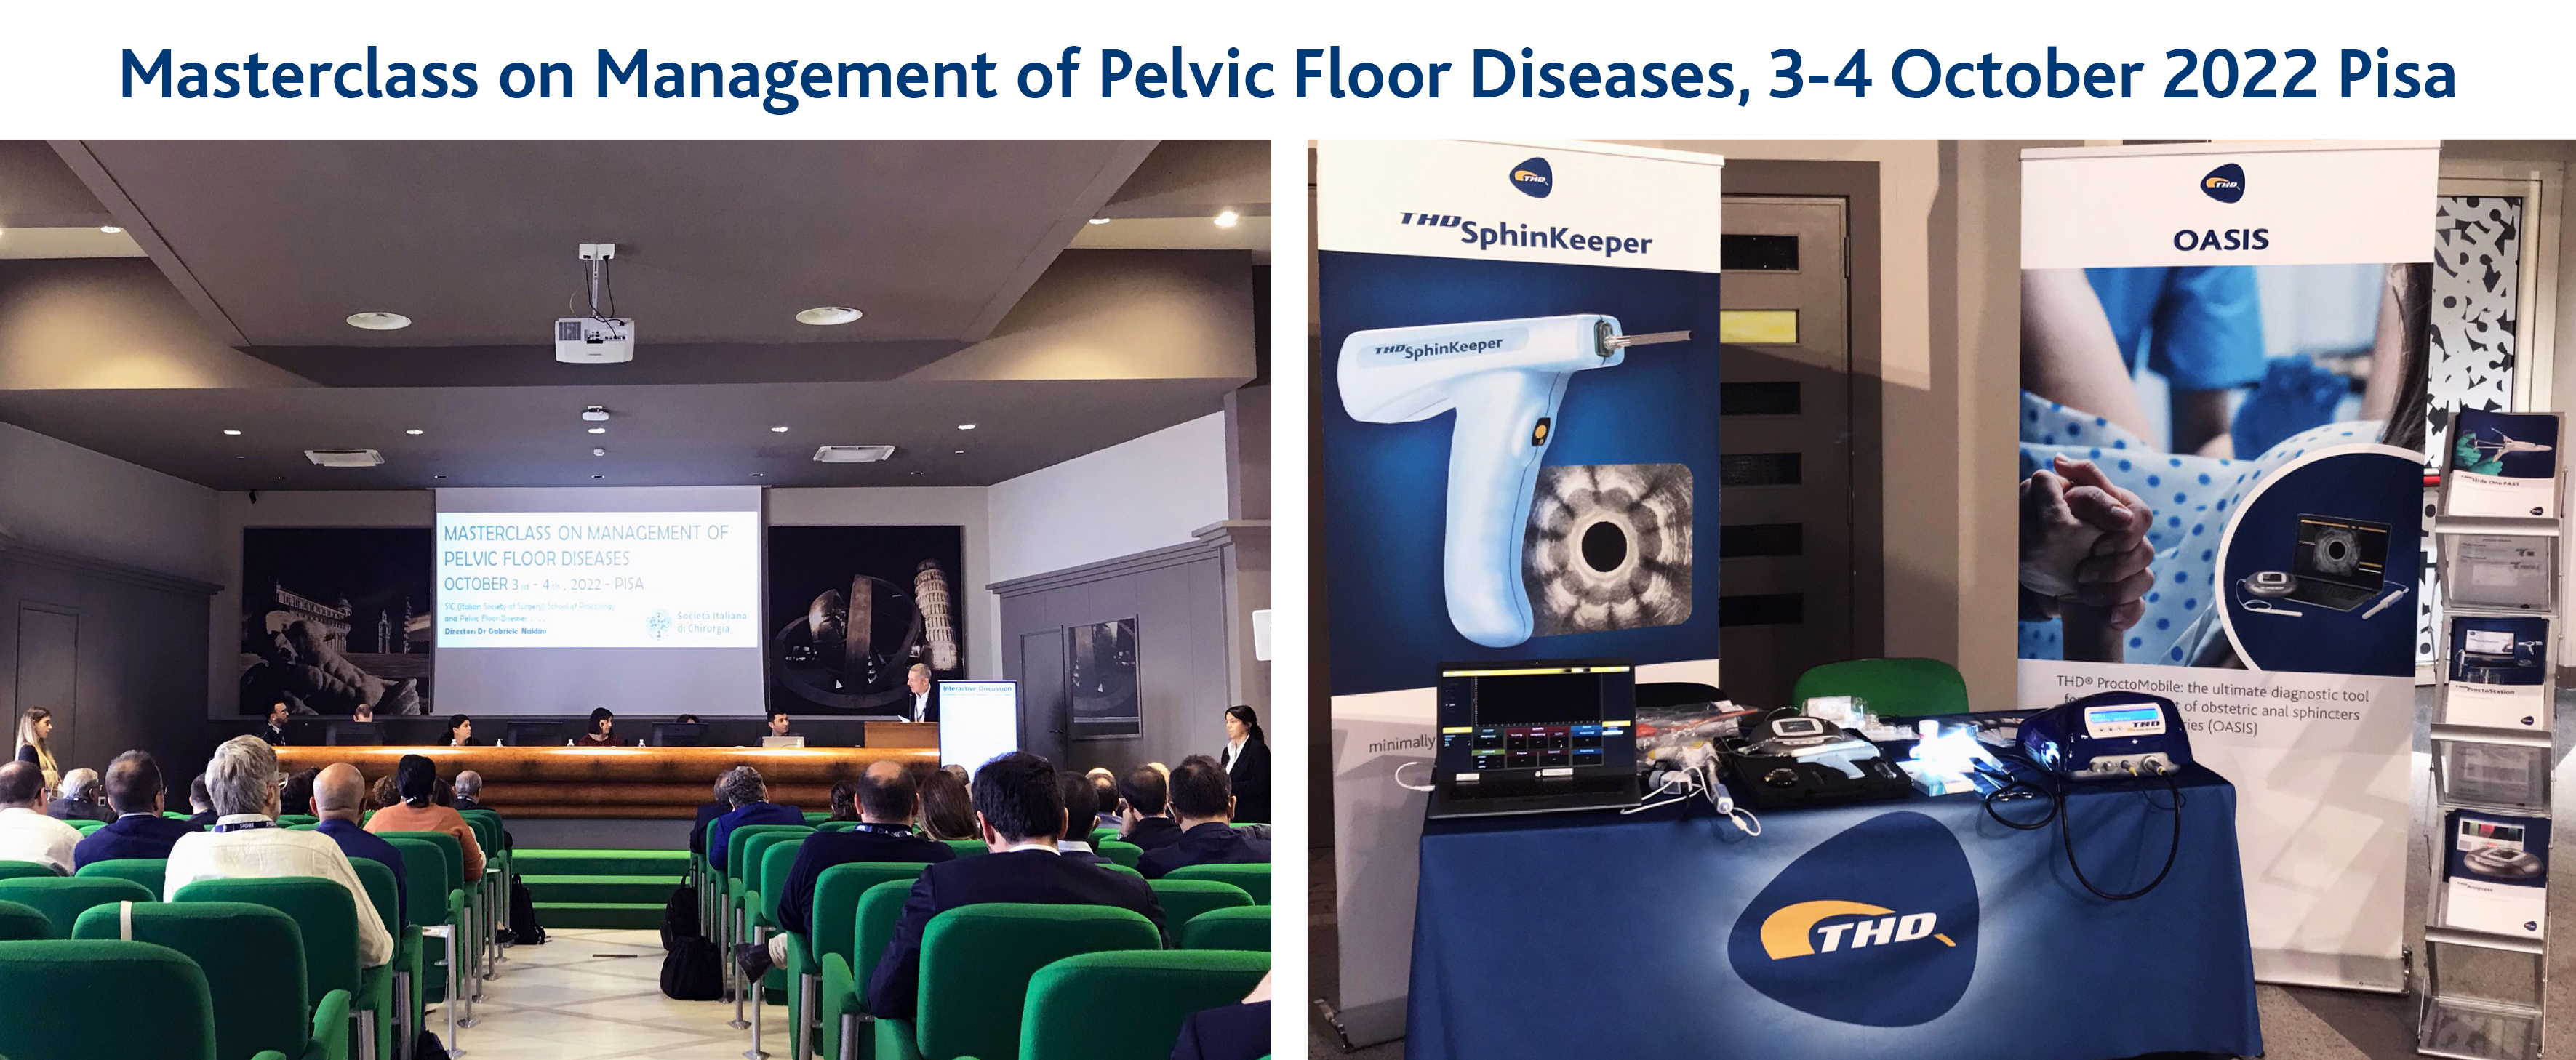 On 3-4 October THD was in Pisa to participate in the Masterclass on Management of Pelvic Floor Diseases.